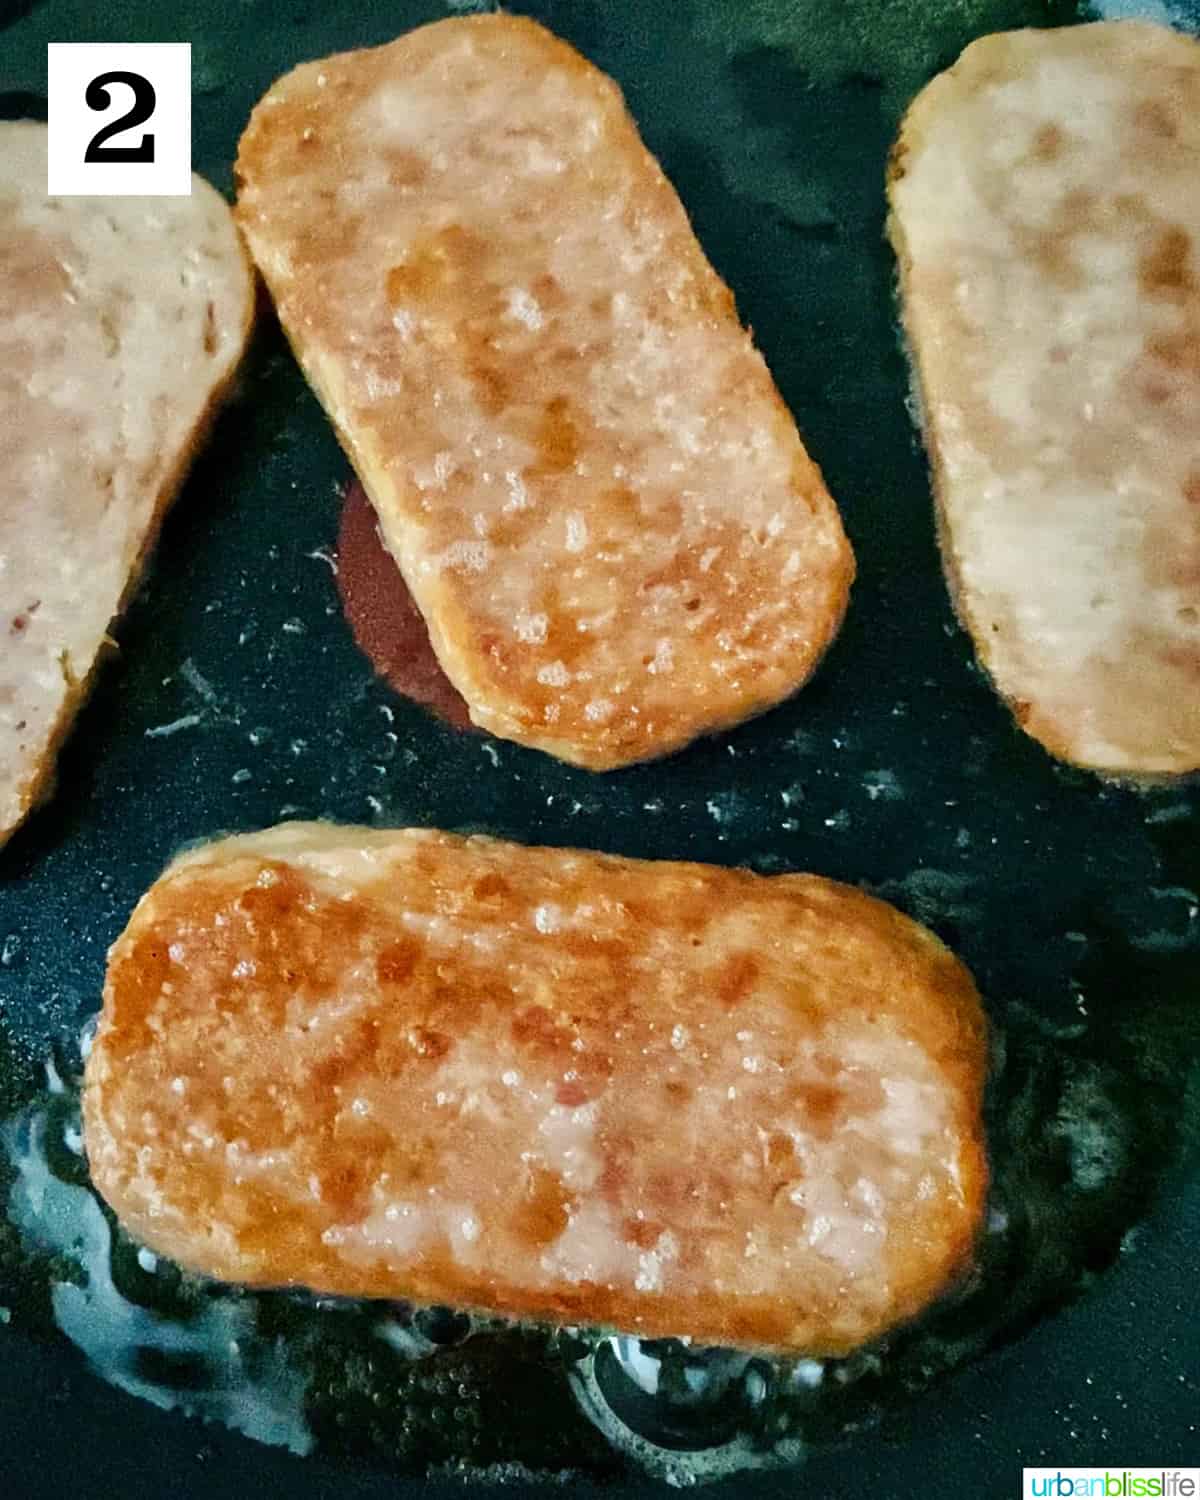 Spam slices frying in a nonstick skillet